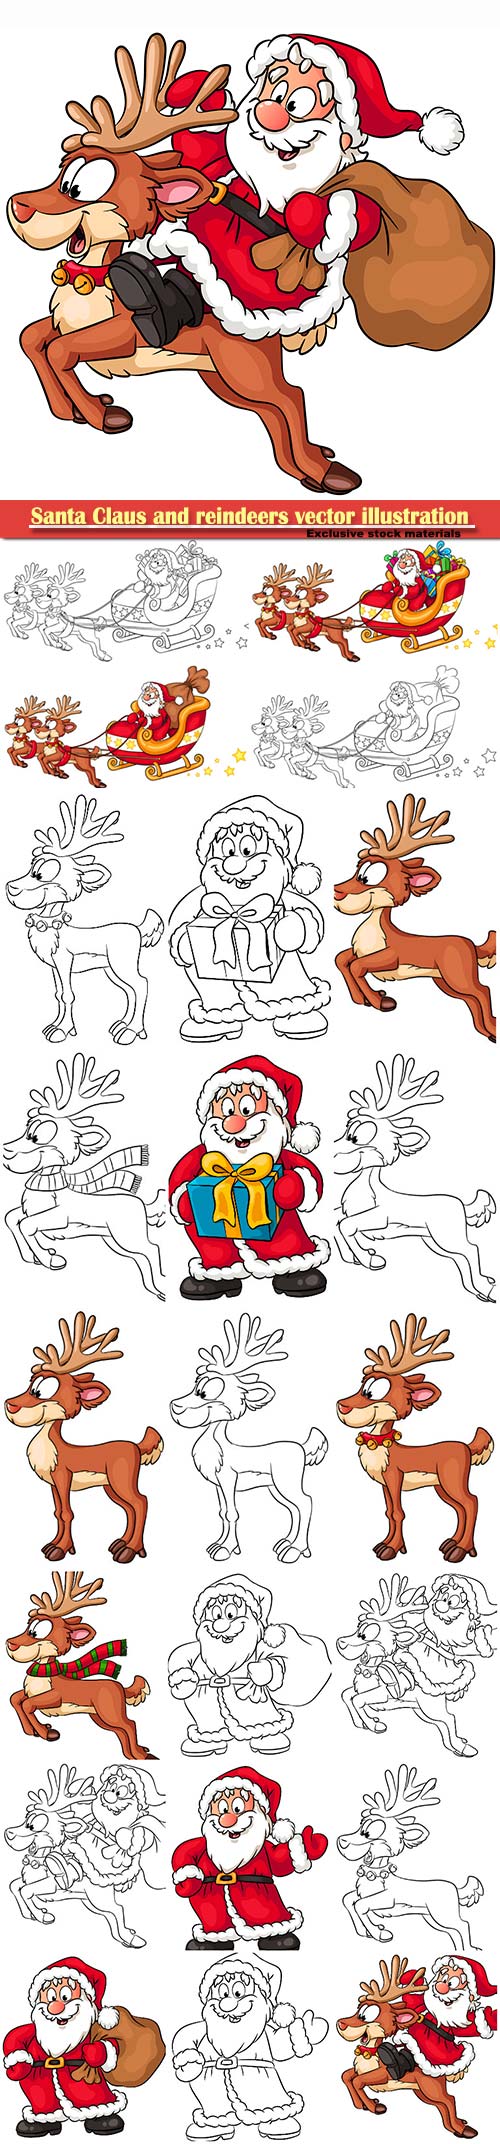 Santa Claus and reindeers vector illustration